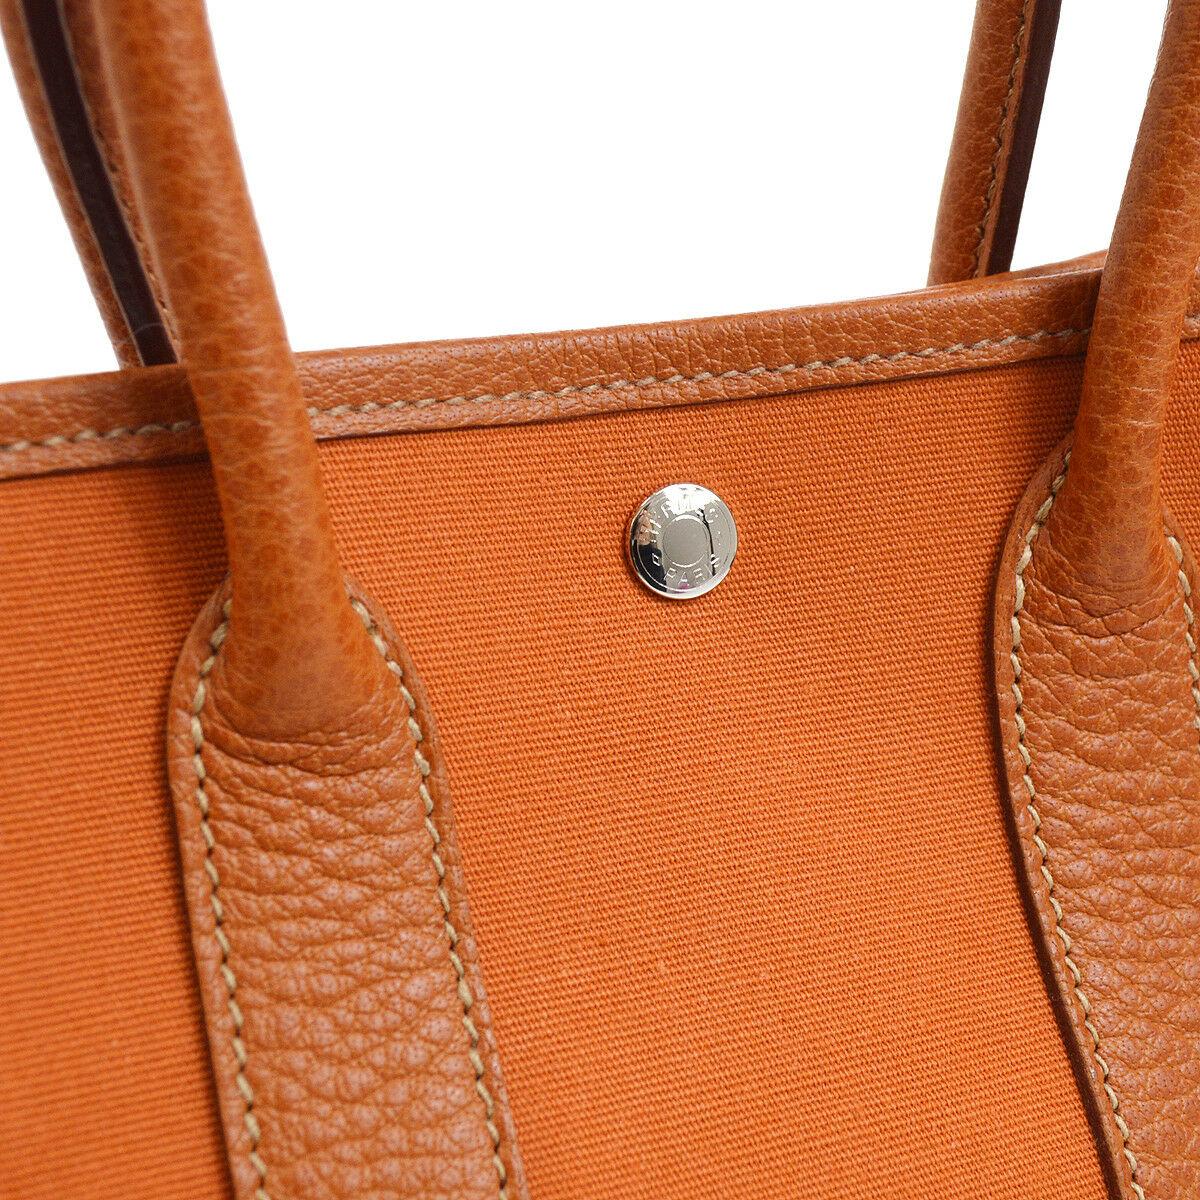 Hermes Orange Leather Canvas Top Handle Satchel Mini Garden Small Tote Bag in Box

Canvas
Leather
Woven lining
Snap closure
Silver tone hardware
Date code present
Made in France 
Handle drop 4